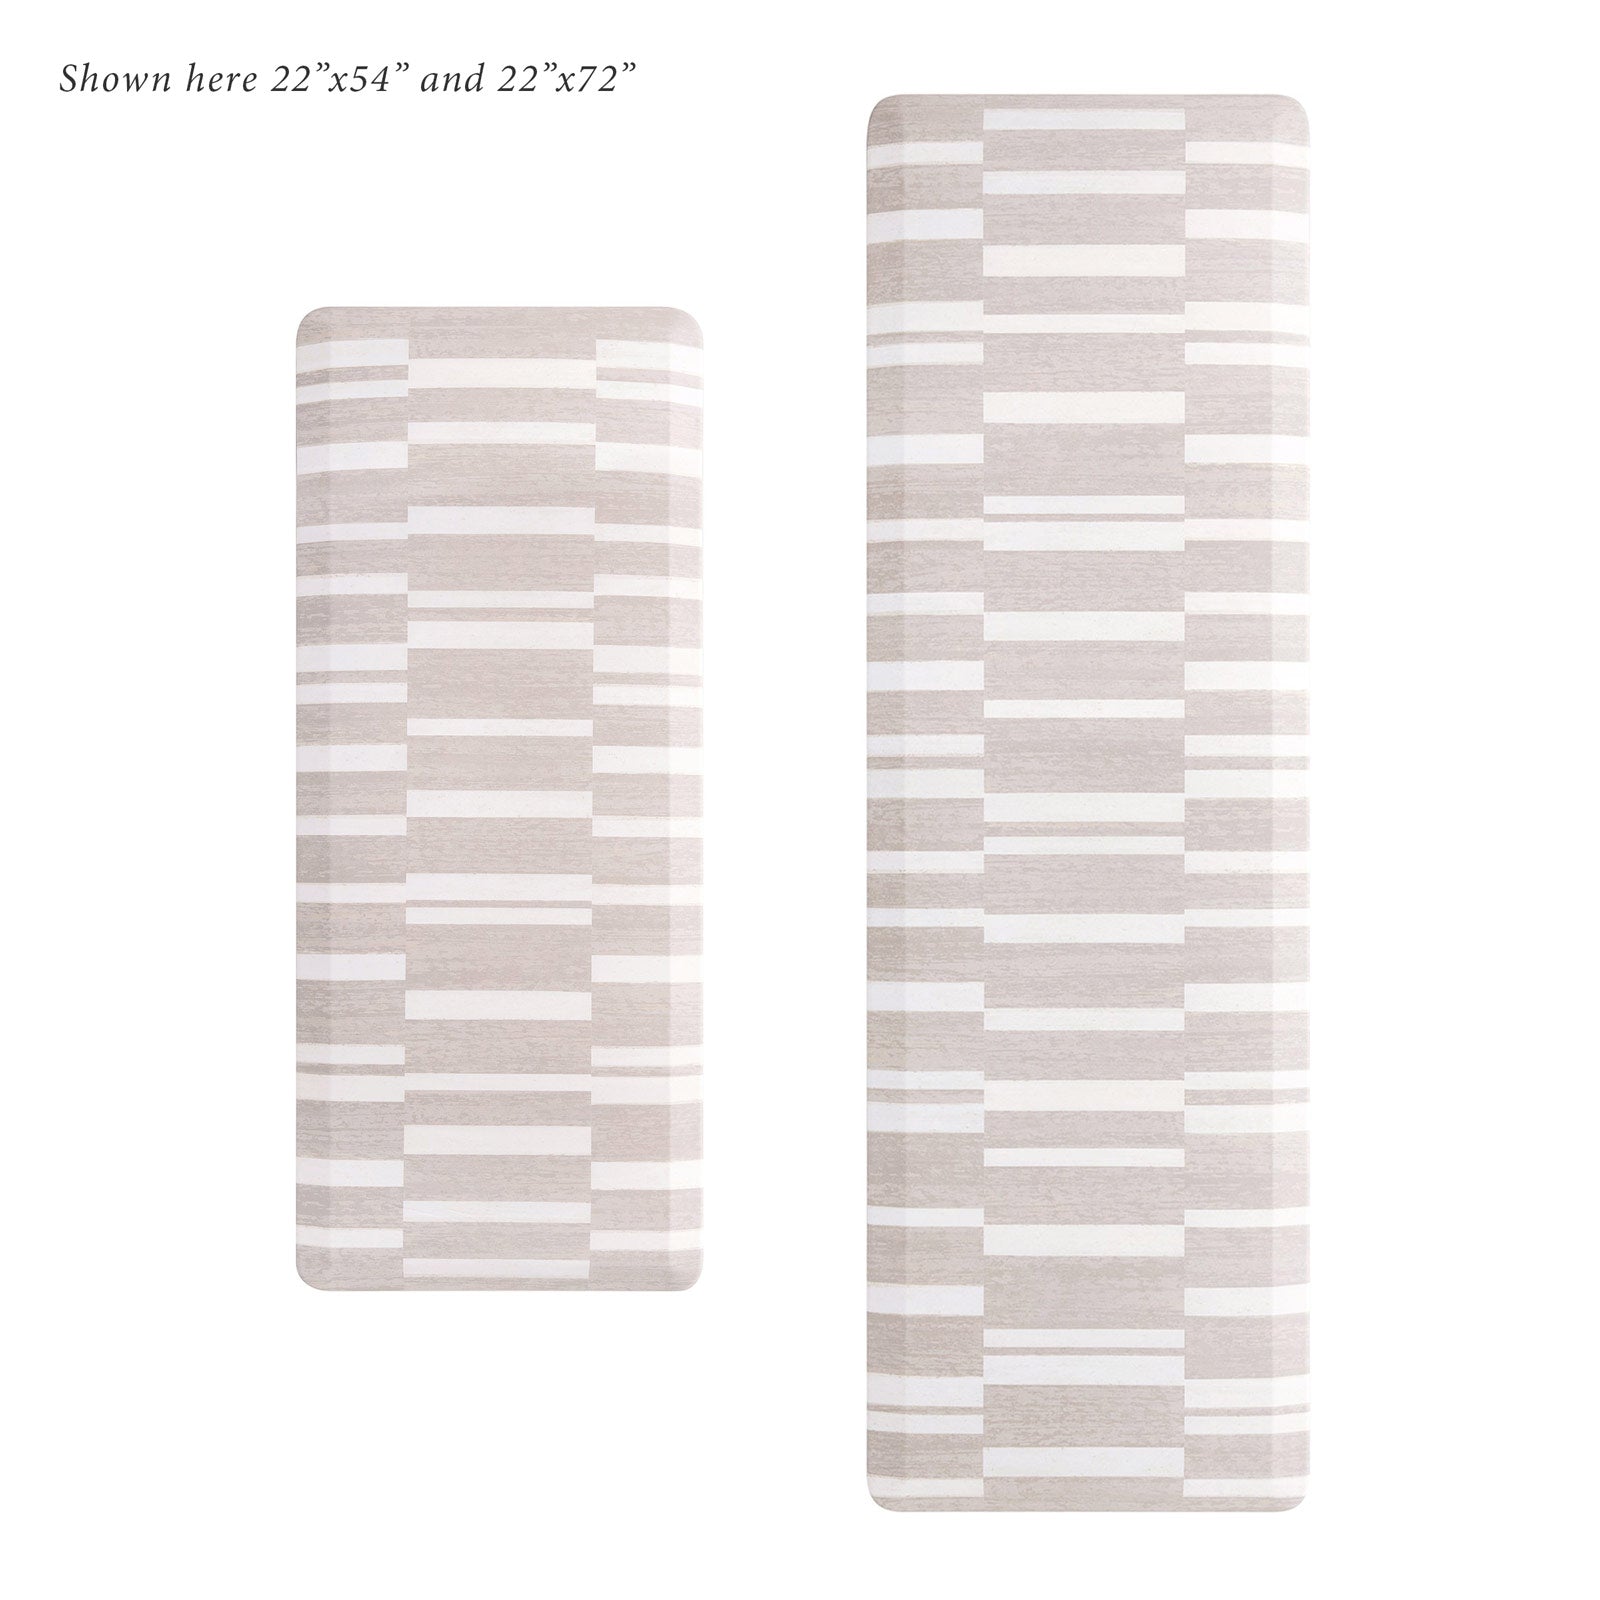 Overhead image of sutton stripe palomino beige and white inverted stripe standing mat shown in size 22x54 and 22x72